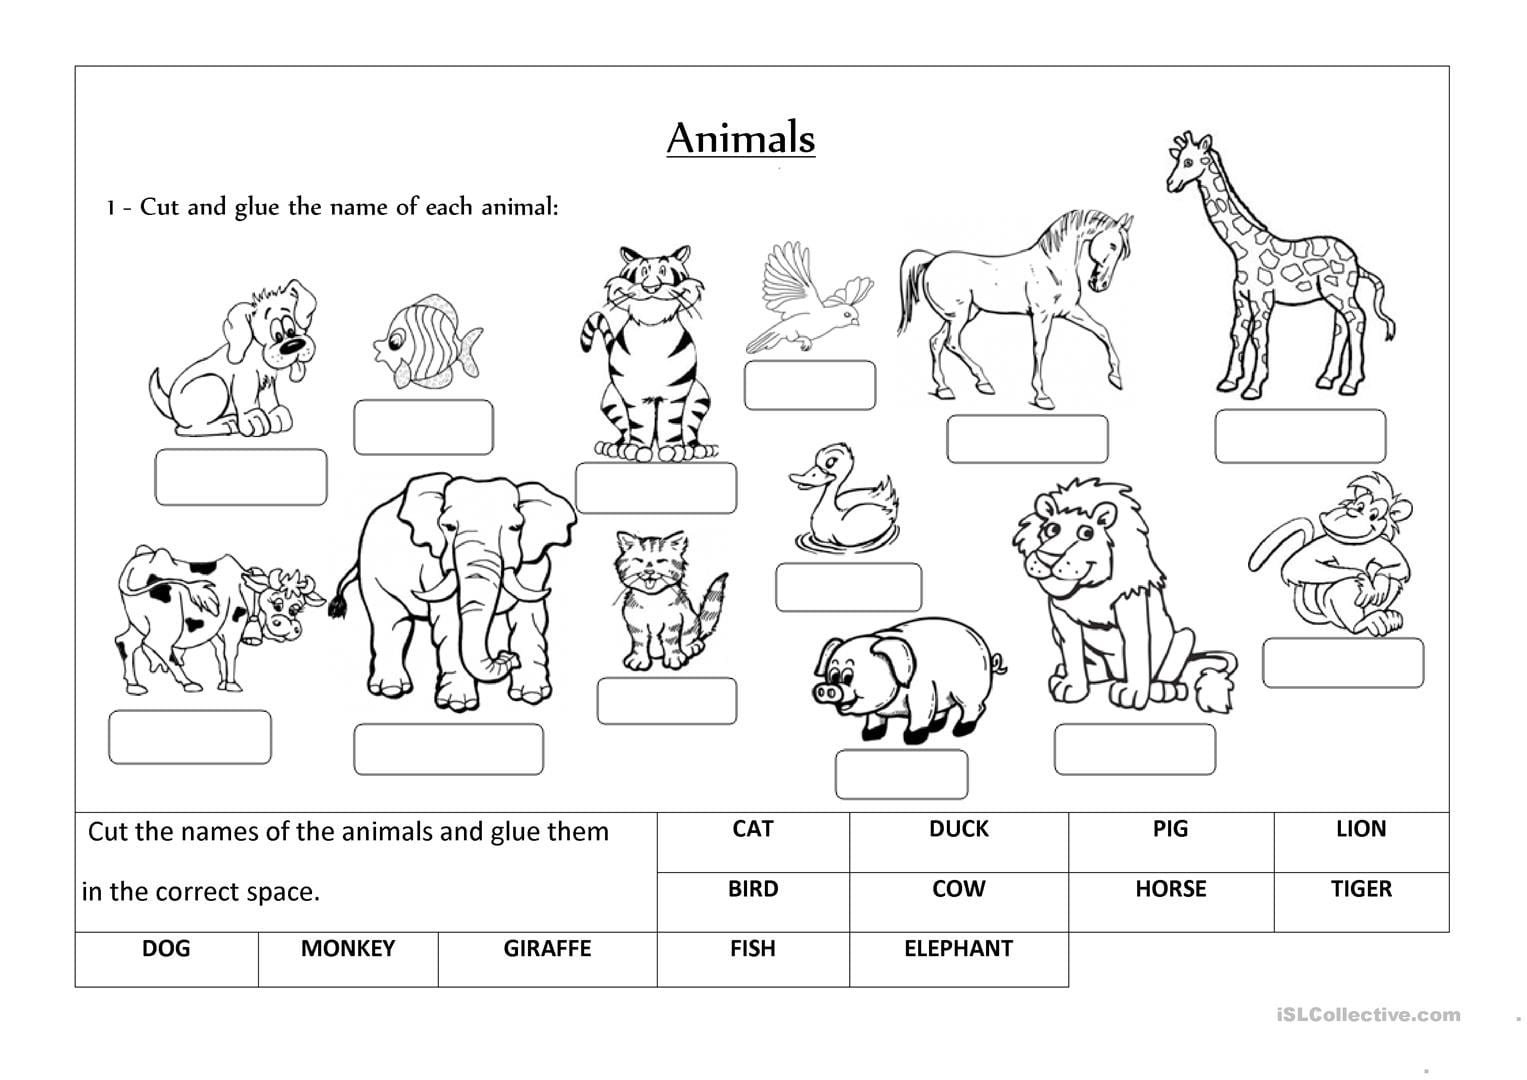 free-animal-classification-worksheets-db-excel